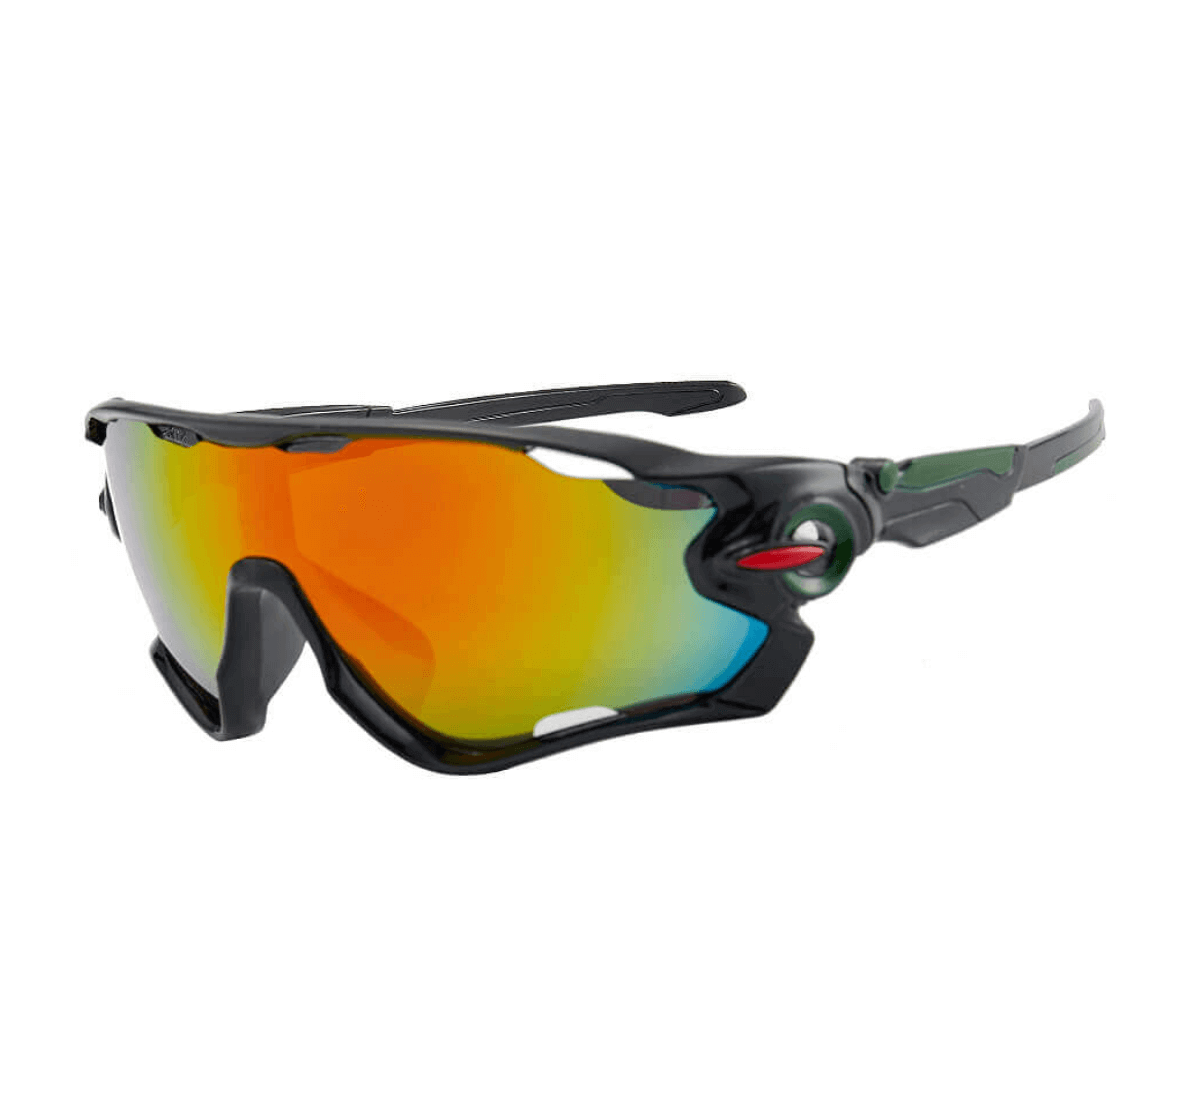 Wholesale Riding Sunglasses from China Sunglasses Manufacturer and Supplier